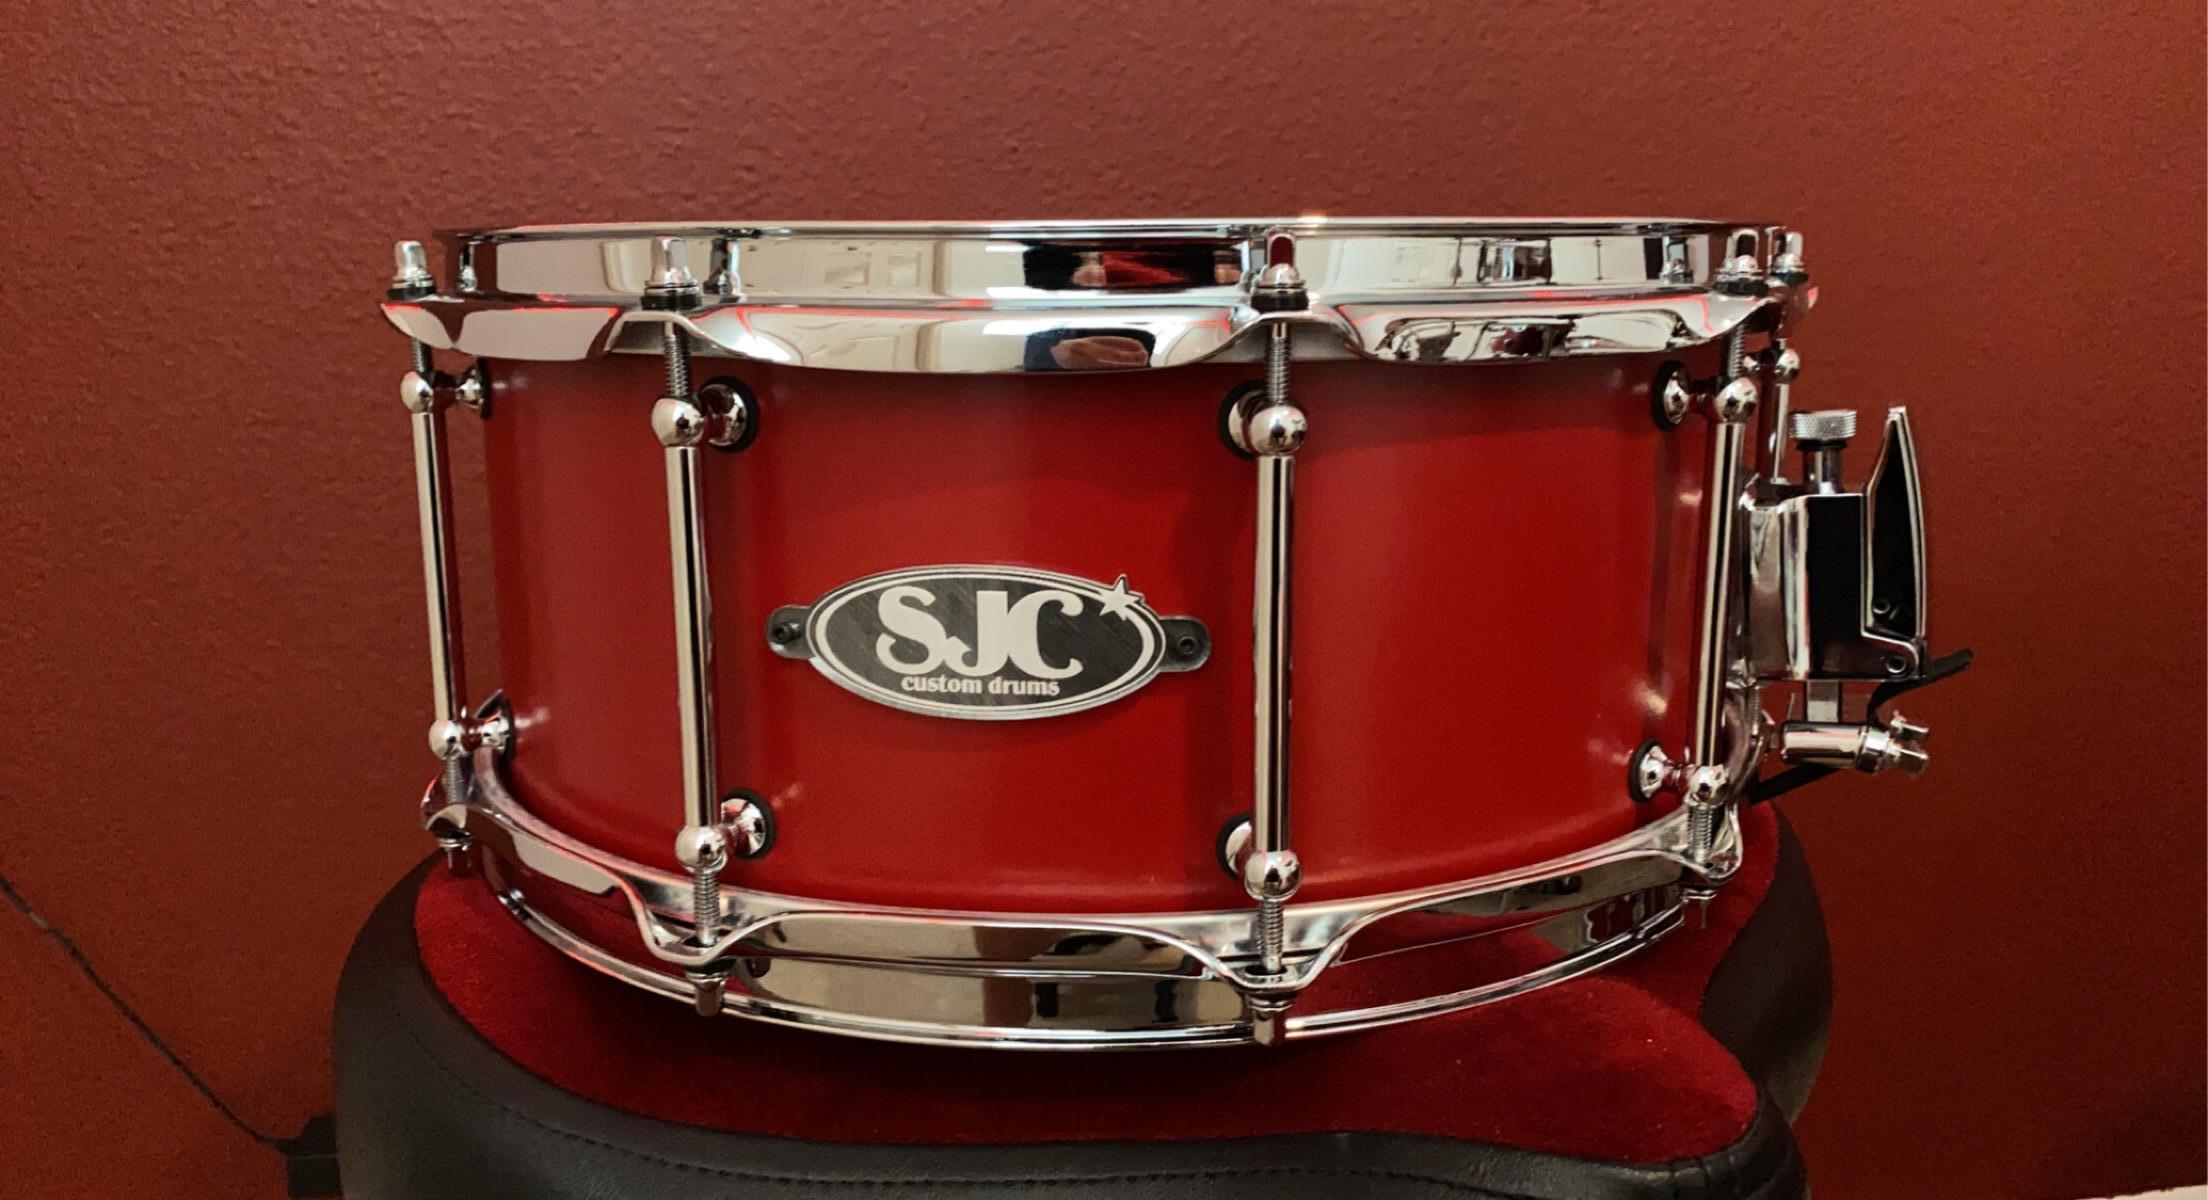 Used SJC Limited Red Ride 6x14 Snare Drum (1 - Sweetwater's Gear